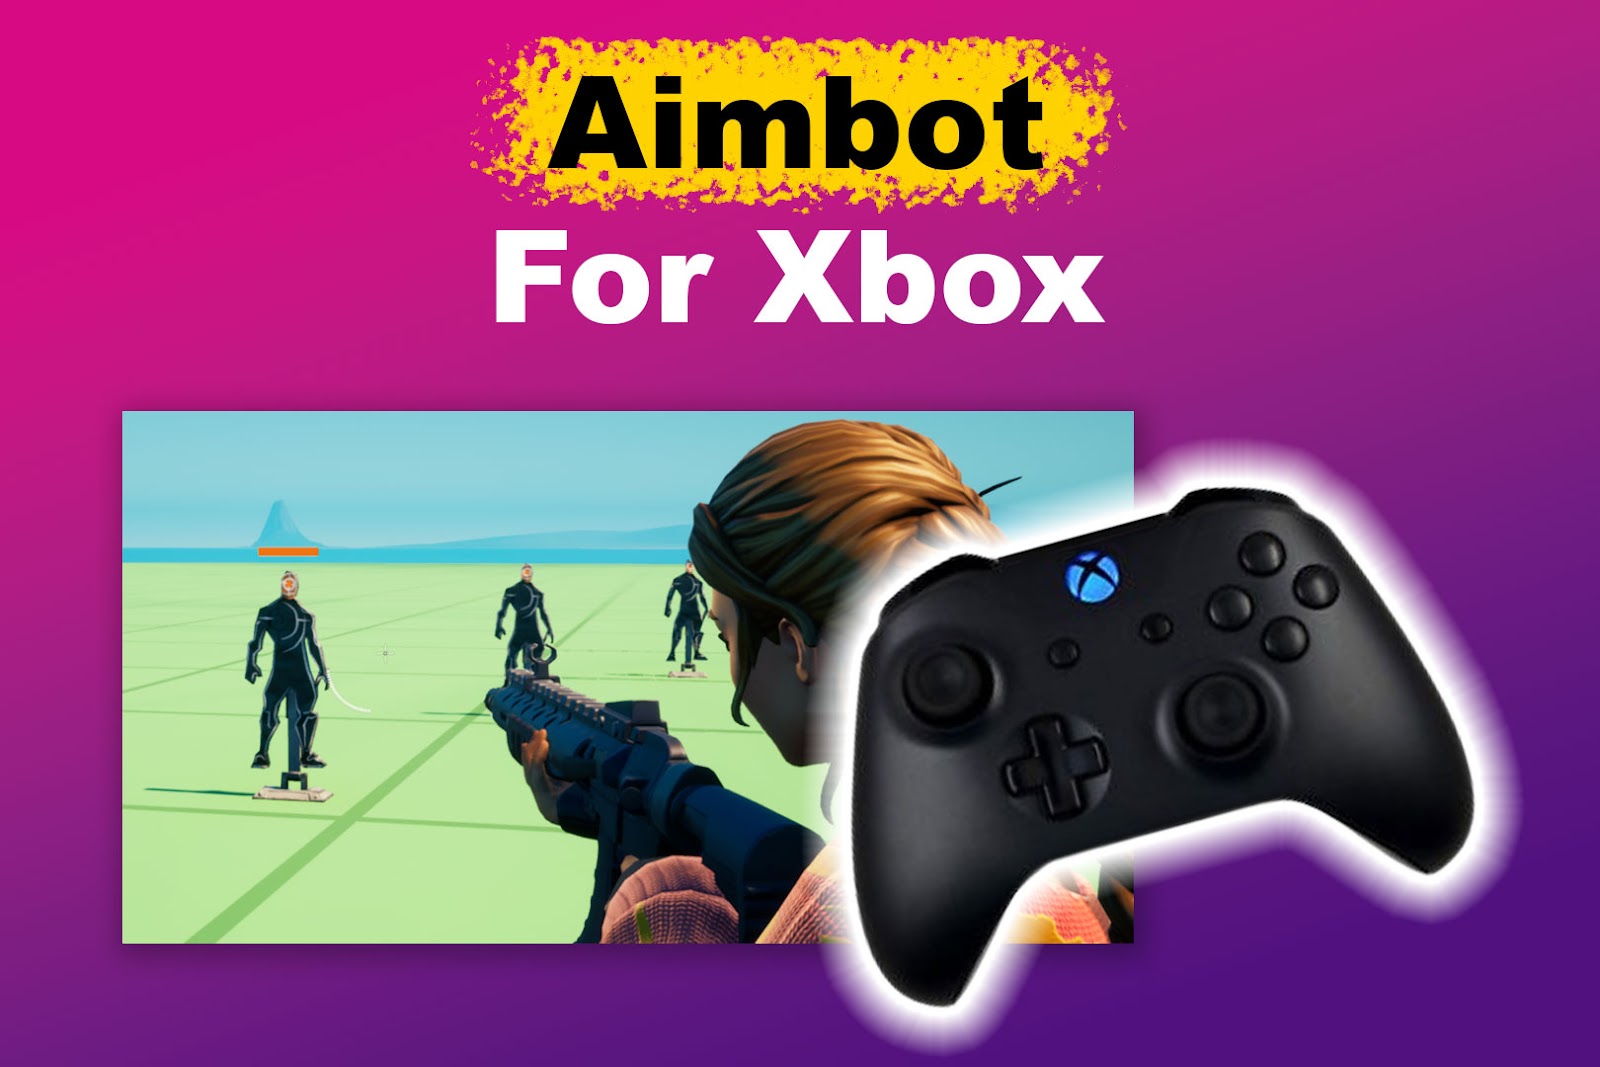 Using Aimbot for Xbox [Is it Legal? How to Install One] - Alvaro